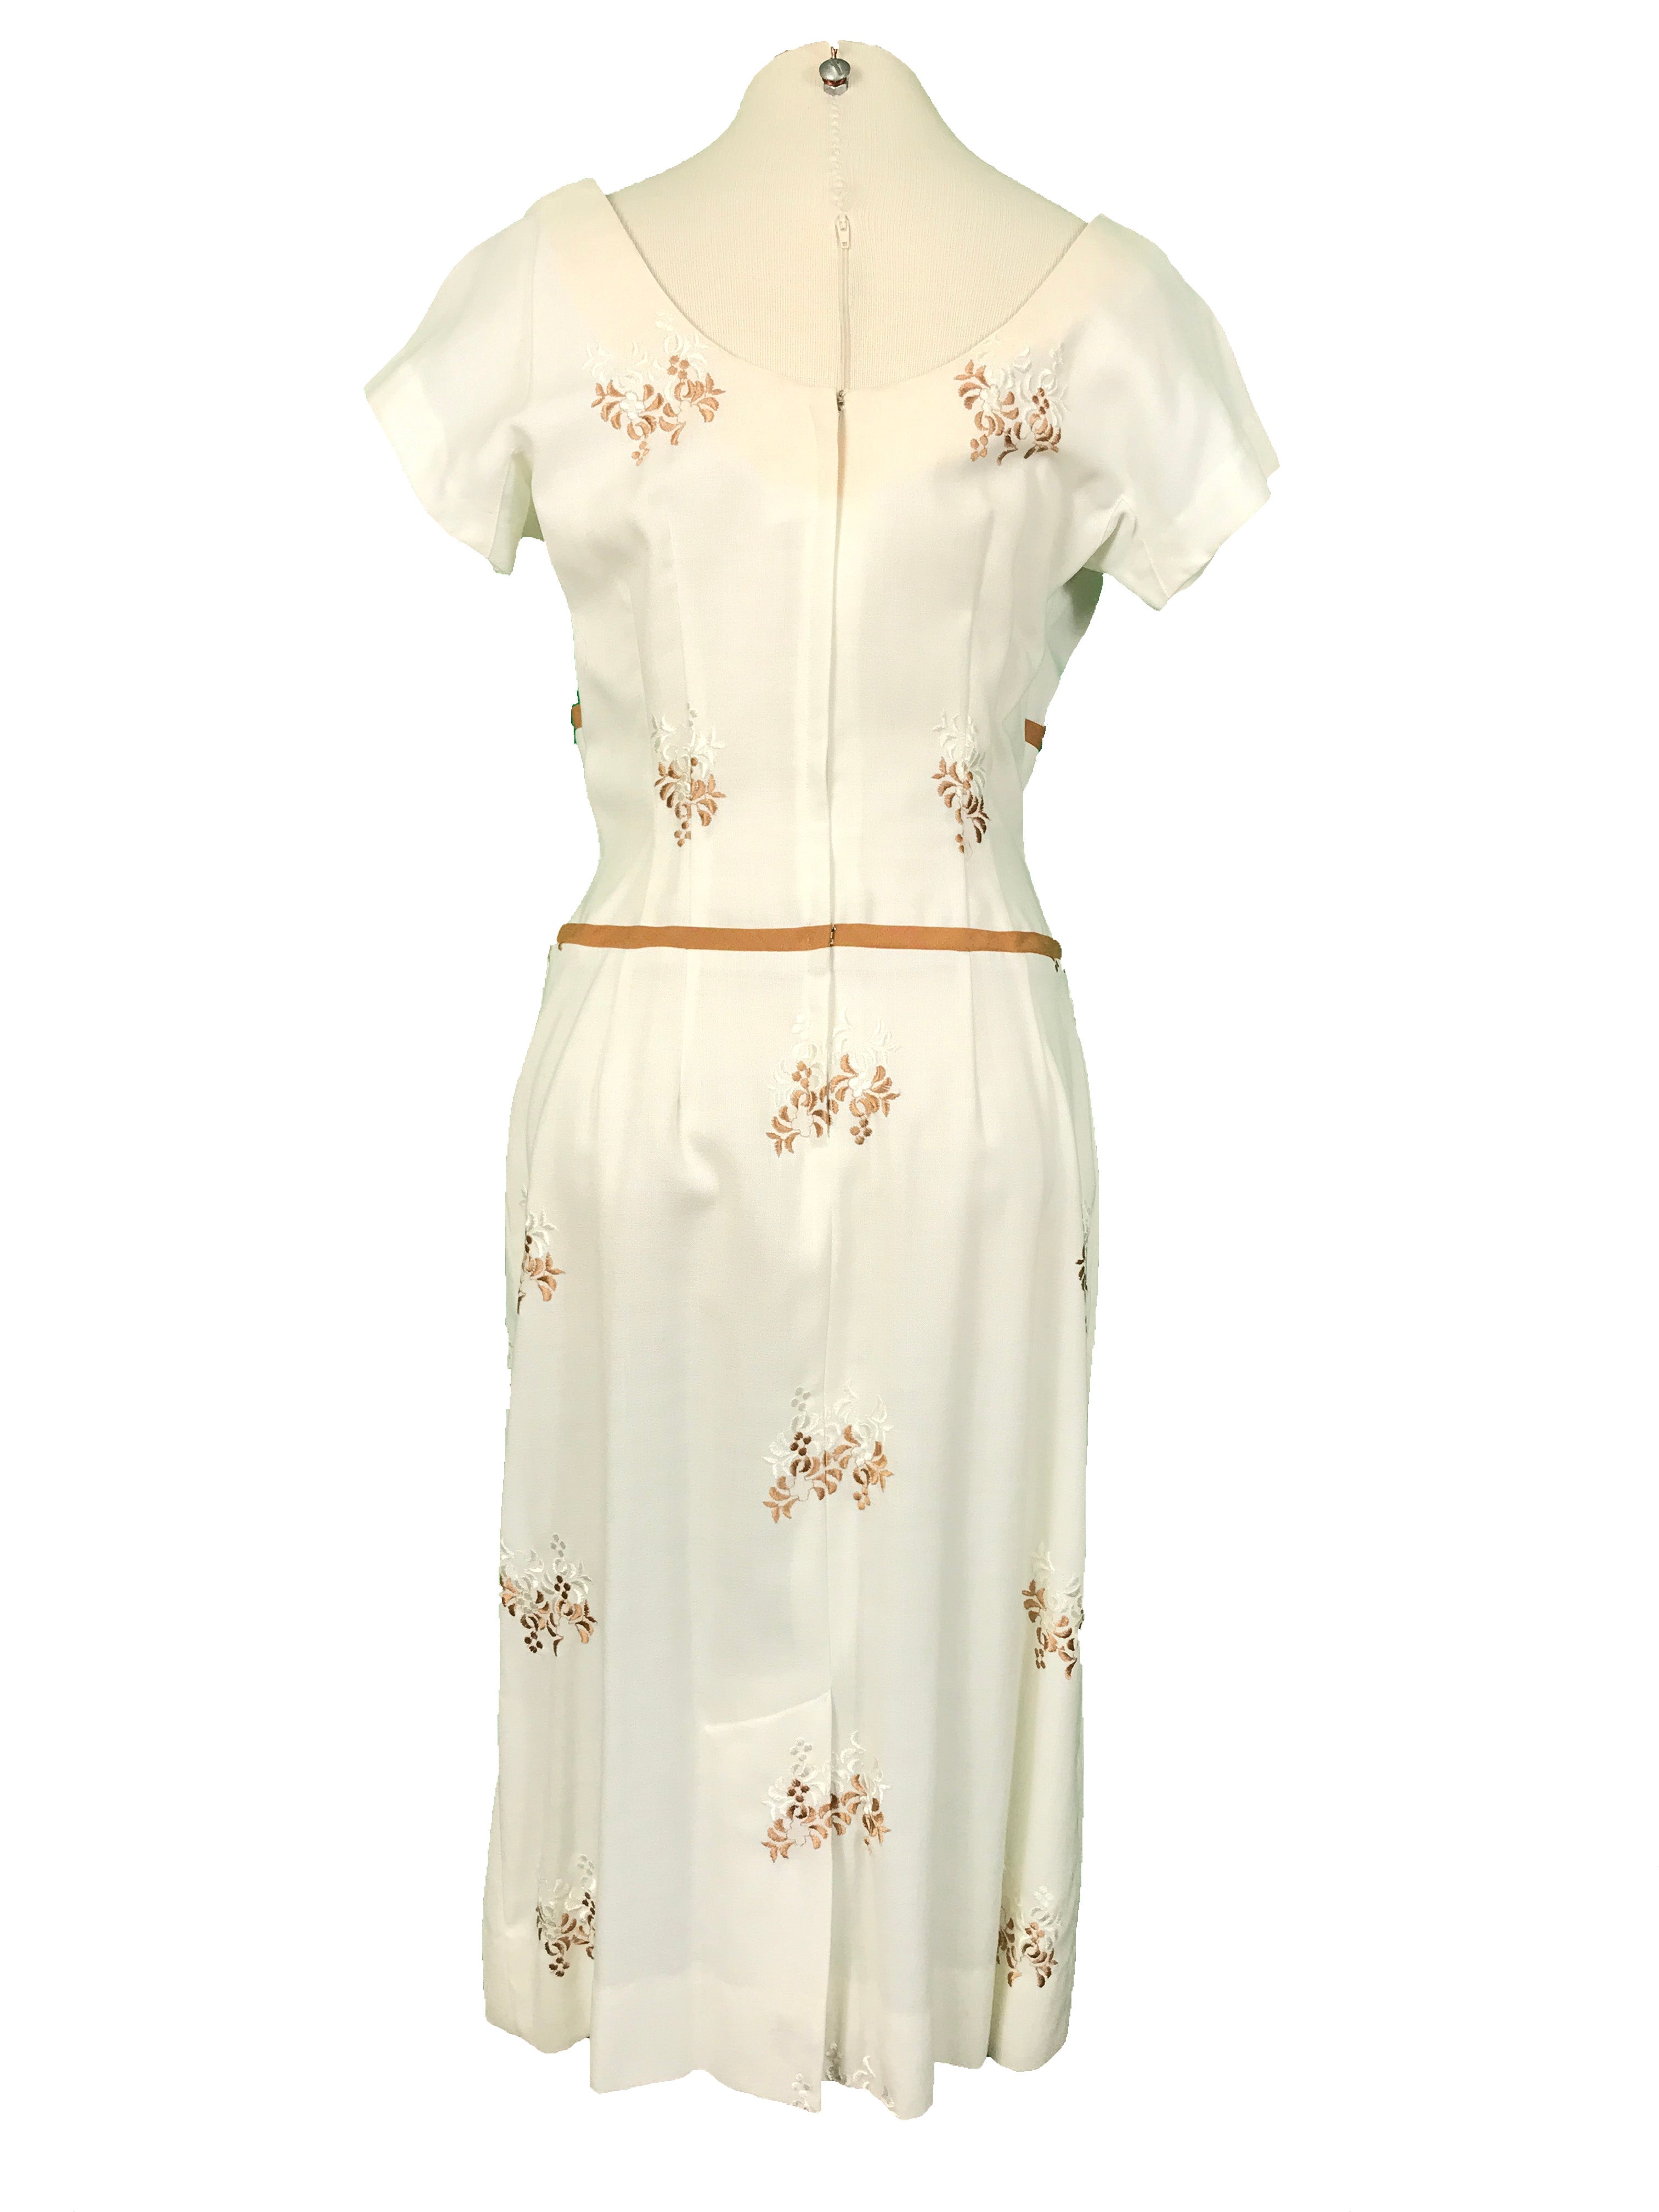 Vintage Herman Marcus Dallas Women's White Calf-Length Embroidered Gown